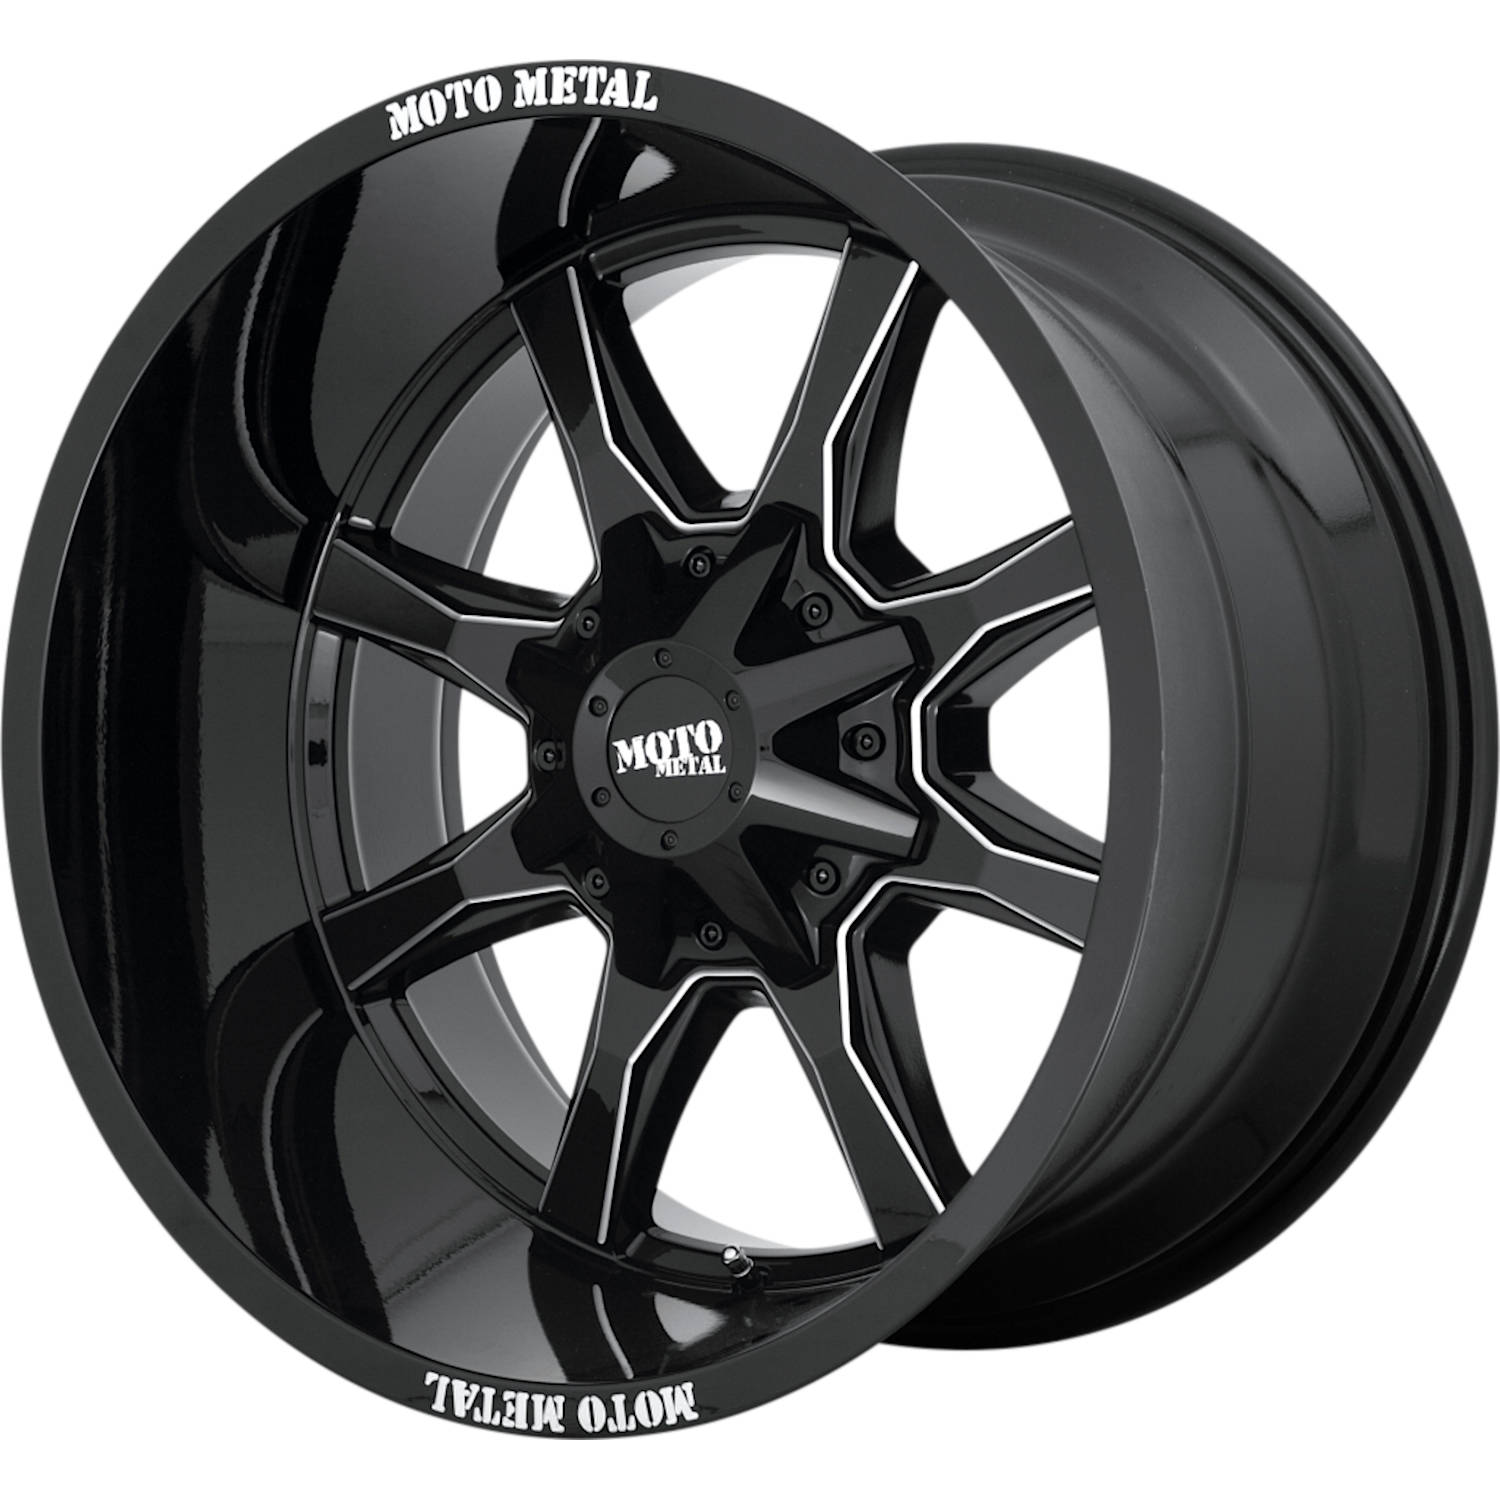 Moto Metal MO970 16x8 0 6x120/6x139.7 (6x5.5) Gloss Black with Milled Spoke Edges - Tires and Engine Performance